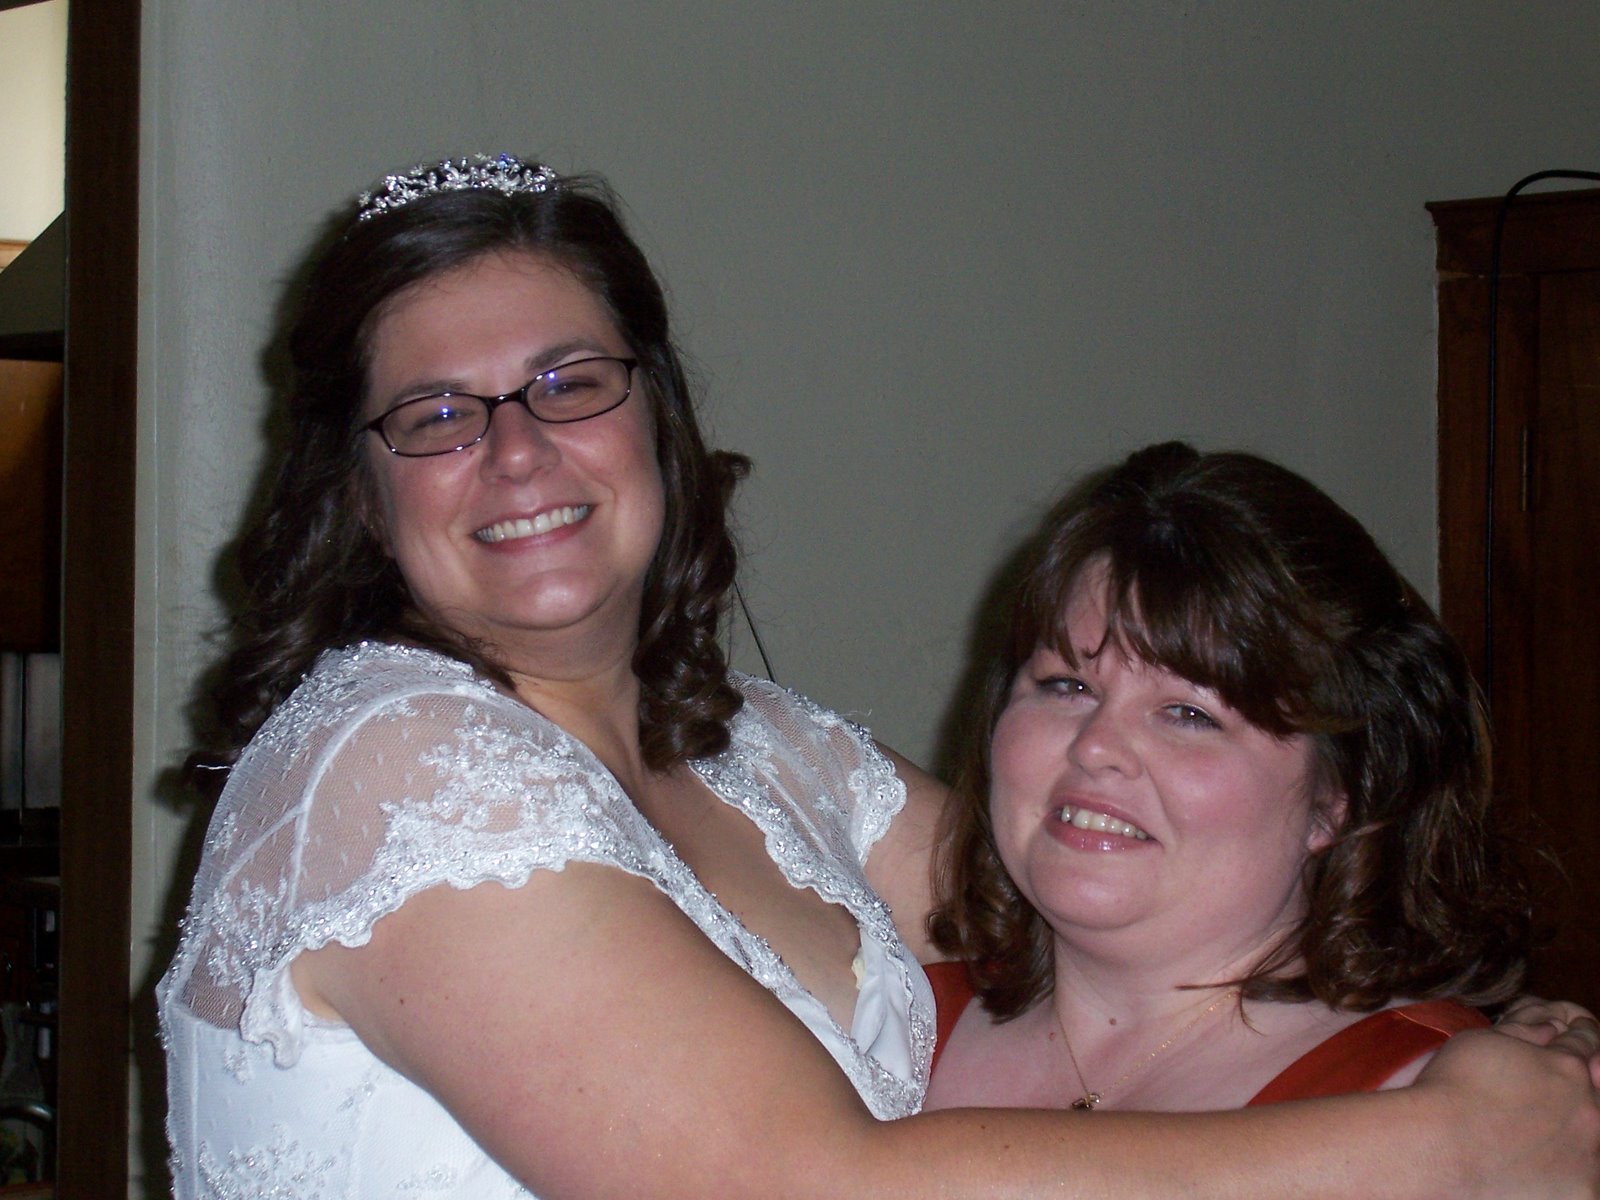 [The+bride+with+Me.jpg]